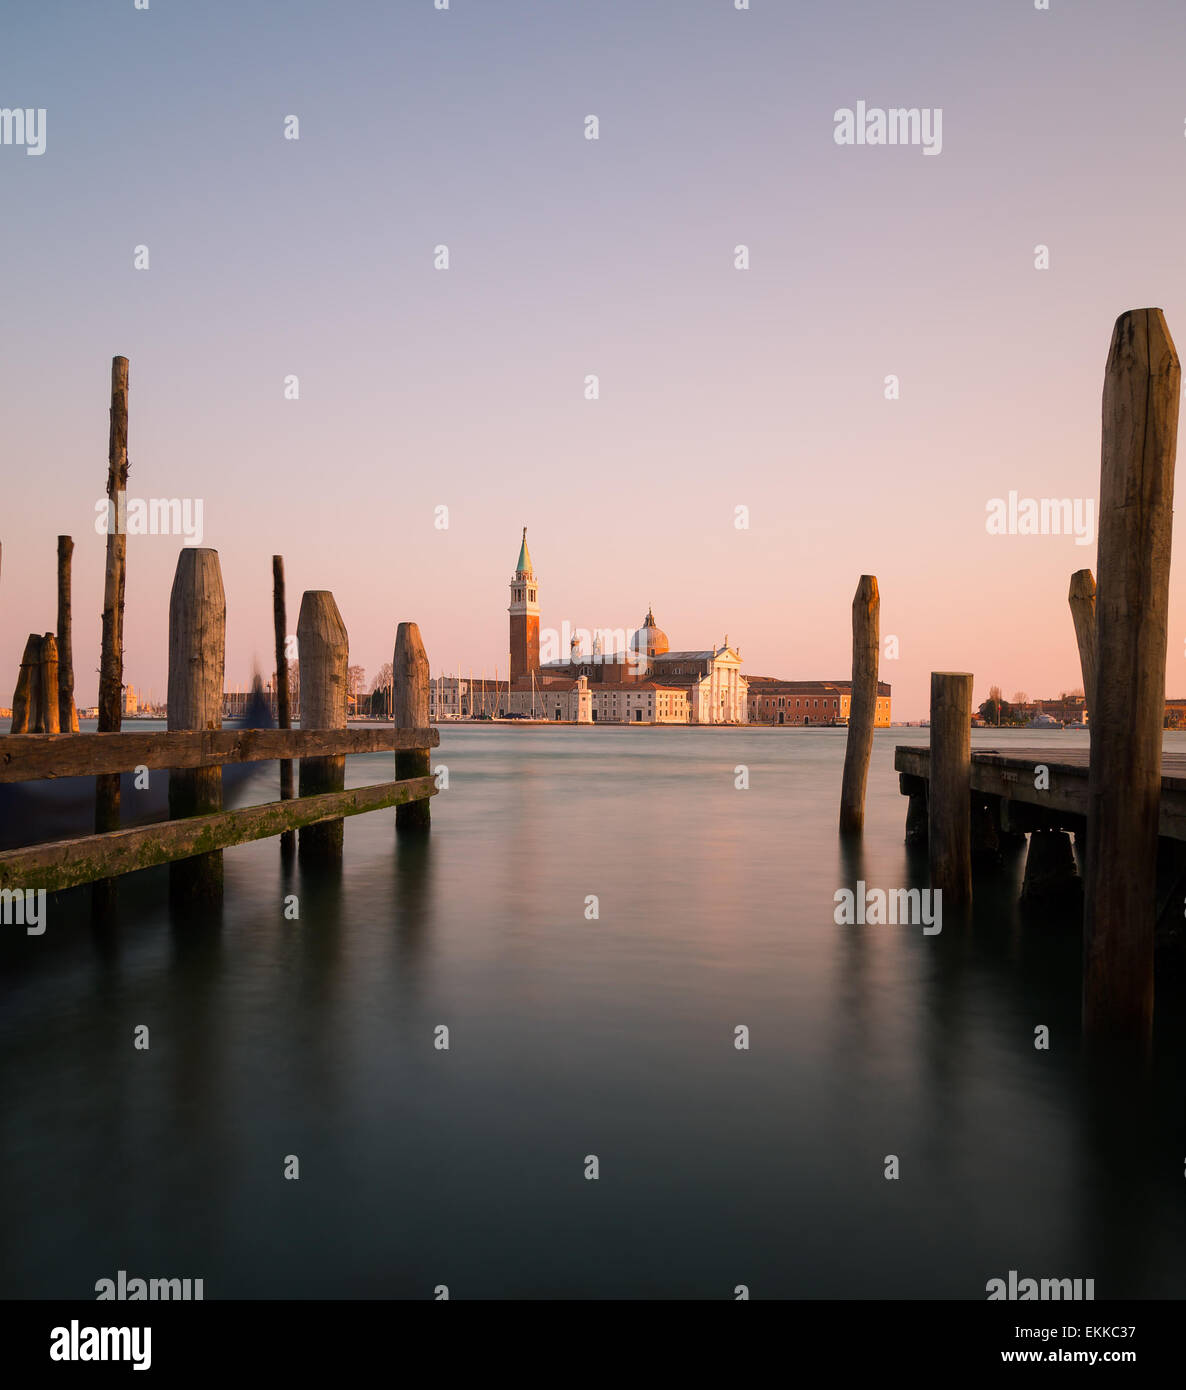 The Church of San Giorgio Maggiore from the main Venice waterfront showing wooden posts in the foreground Stock Photo